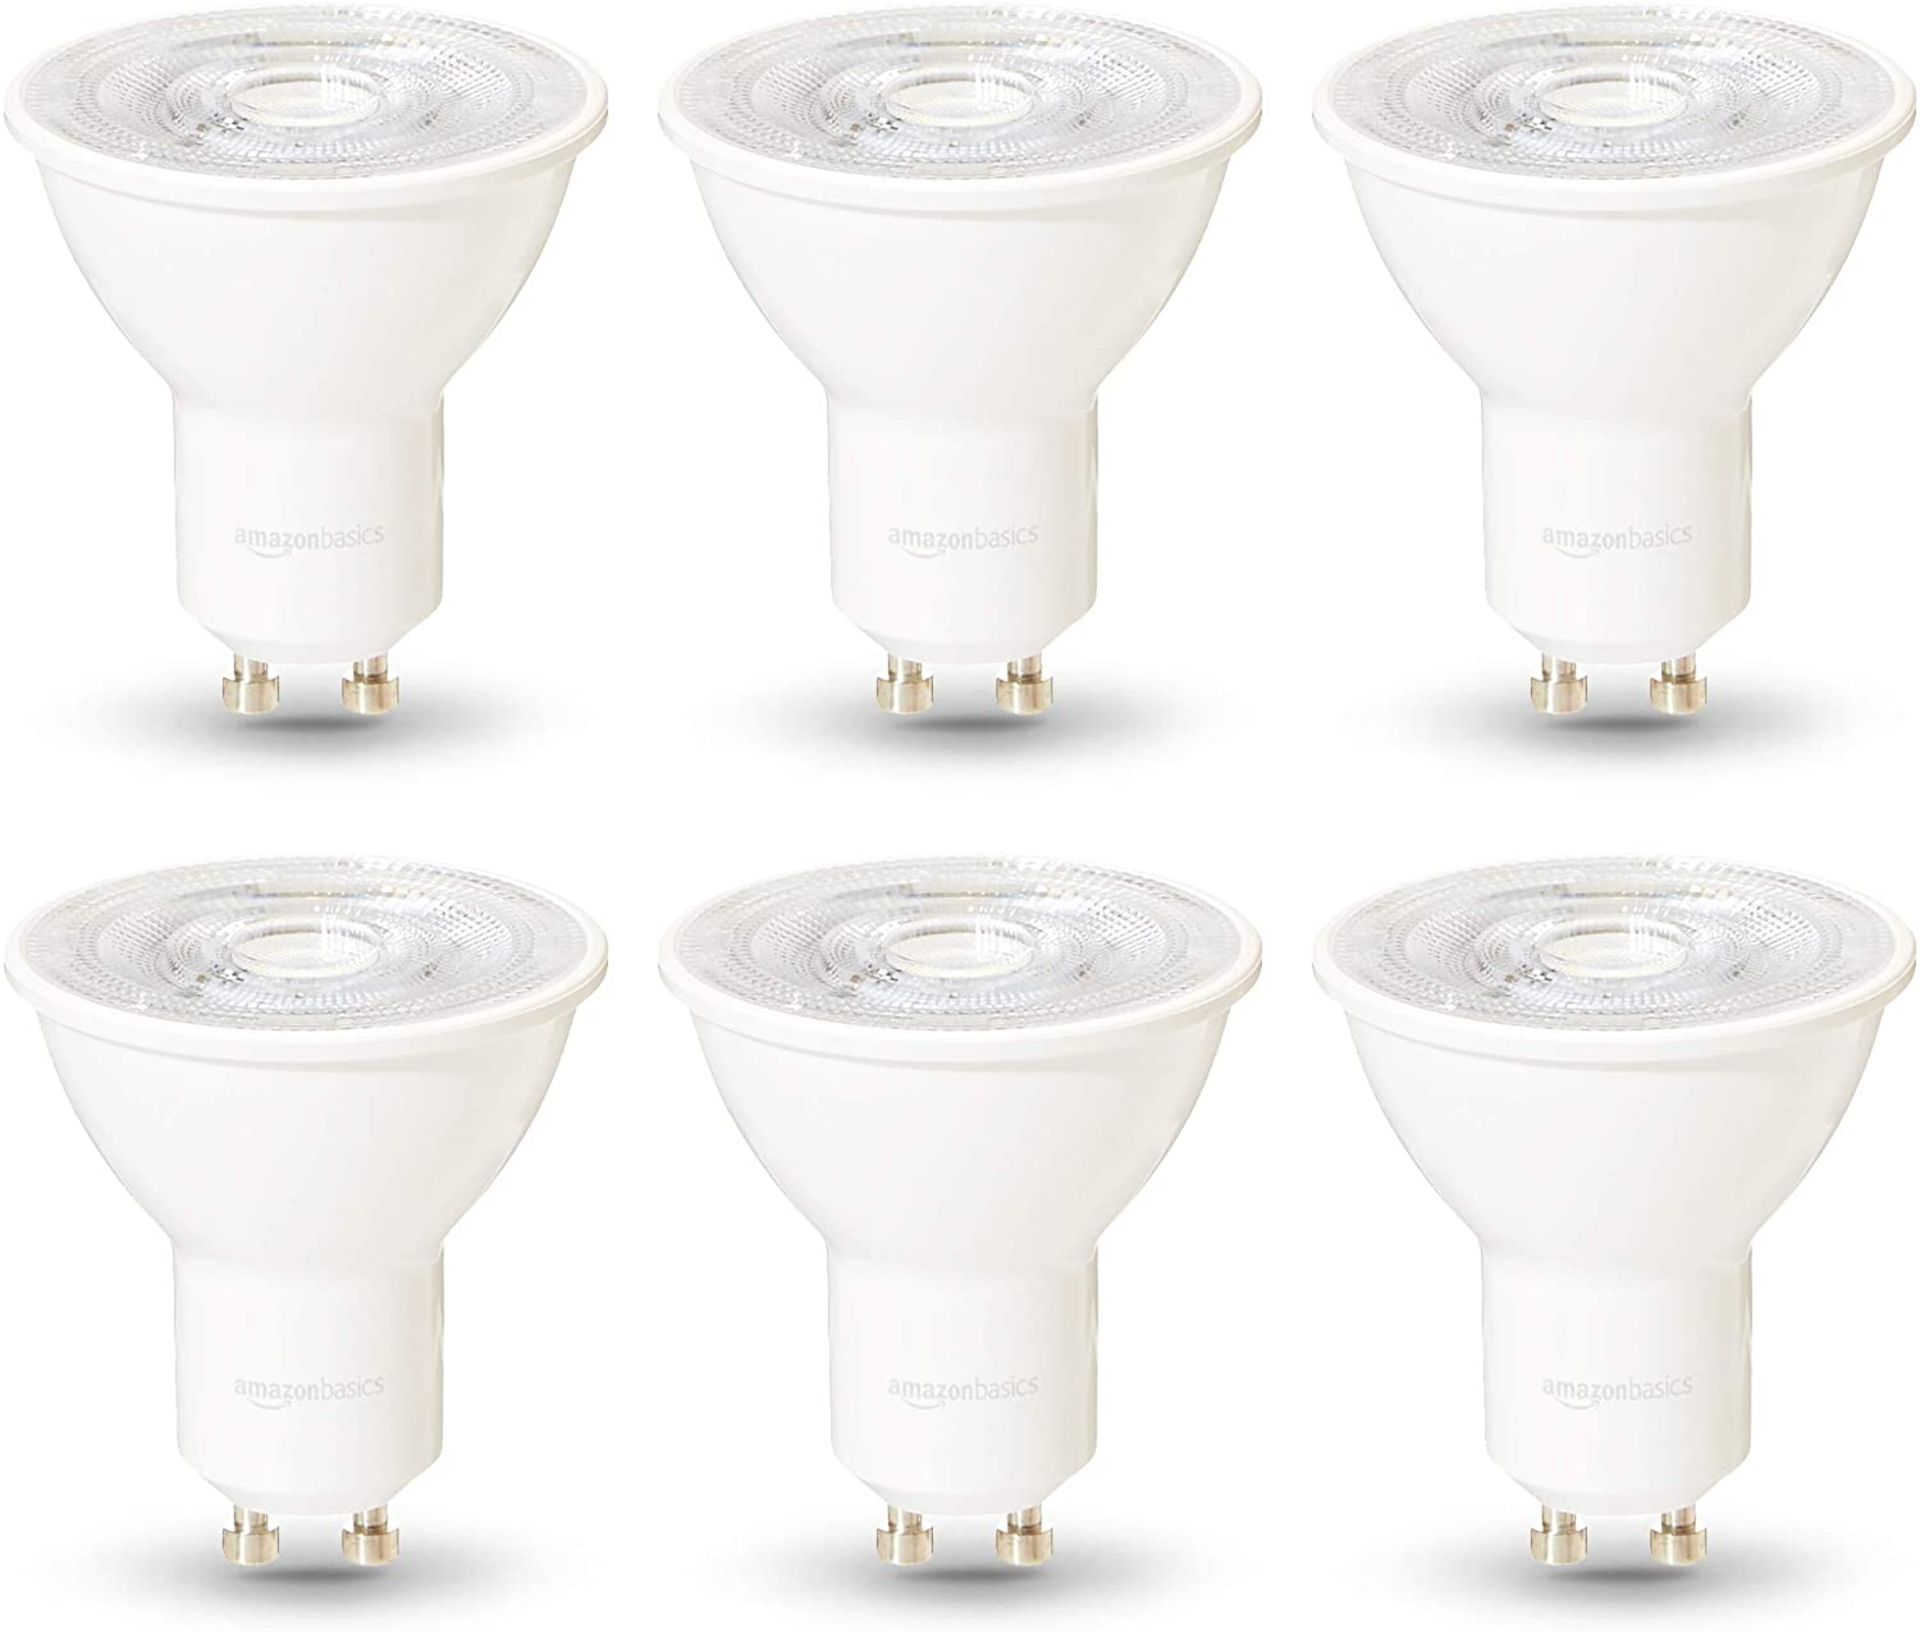 AmazonBasics Professional LED GU10 Spotlight Bulb, 35W equivalent, Cool White, Dimmable - Pack of 6